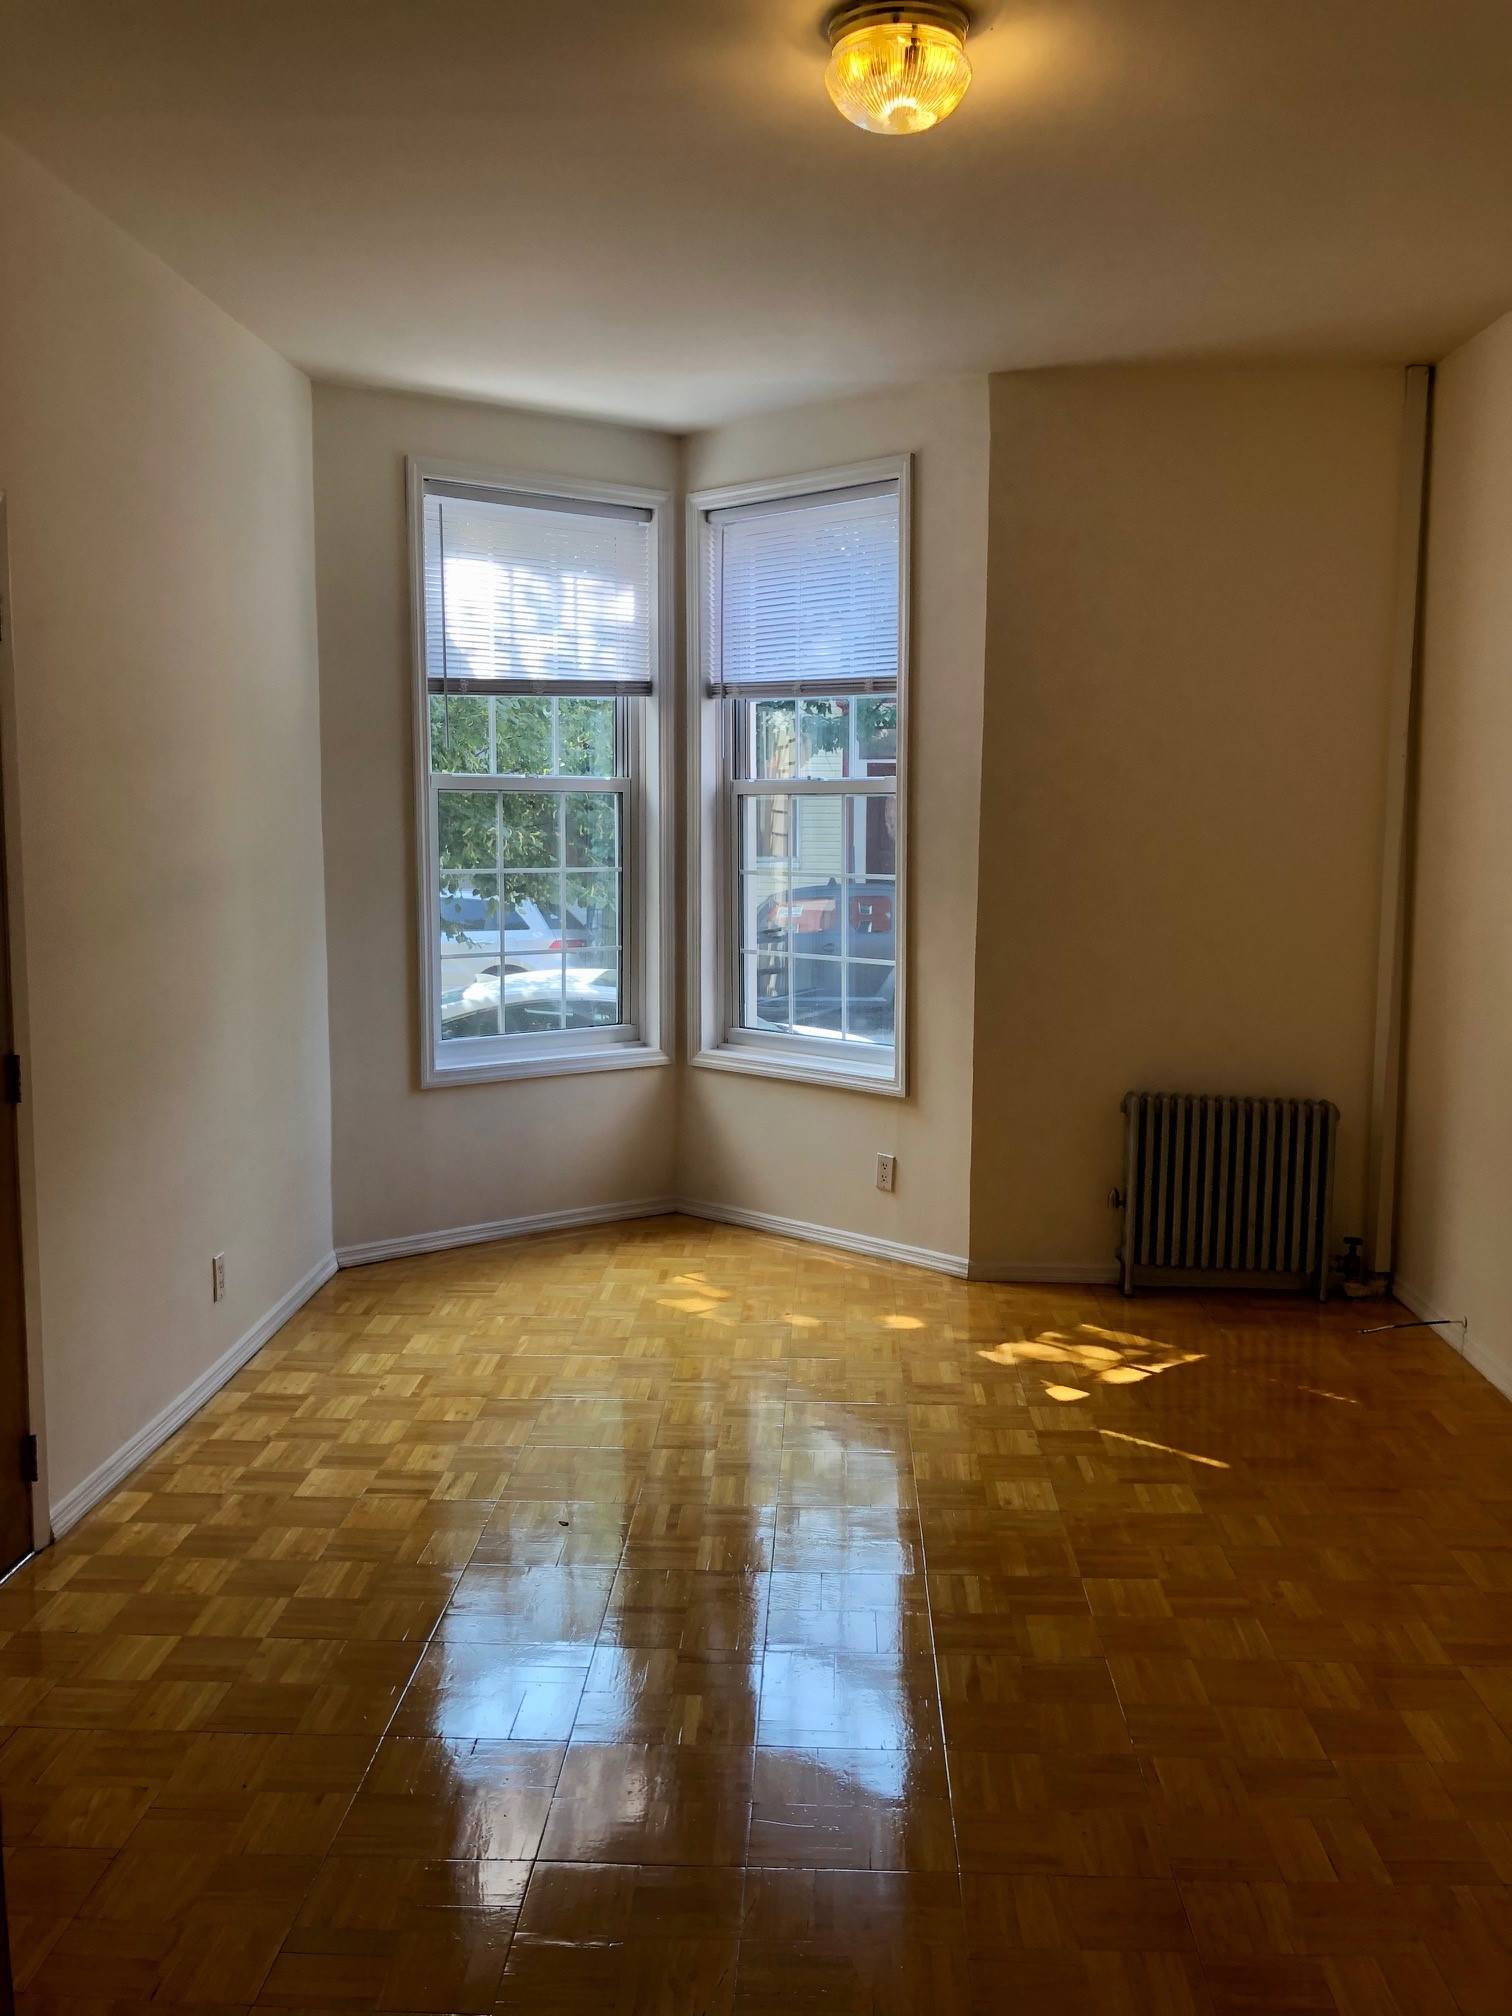 Amazing 1.5 Bedroom Floor Through Apartment in the Heart of Greenpoint